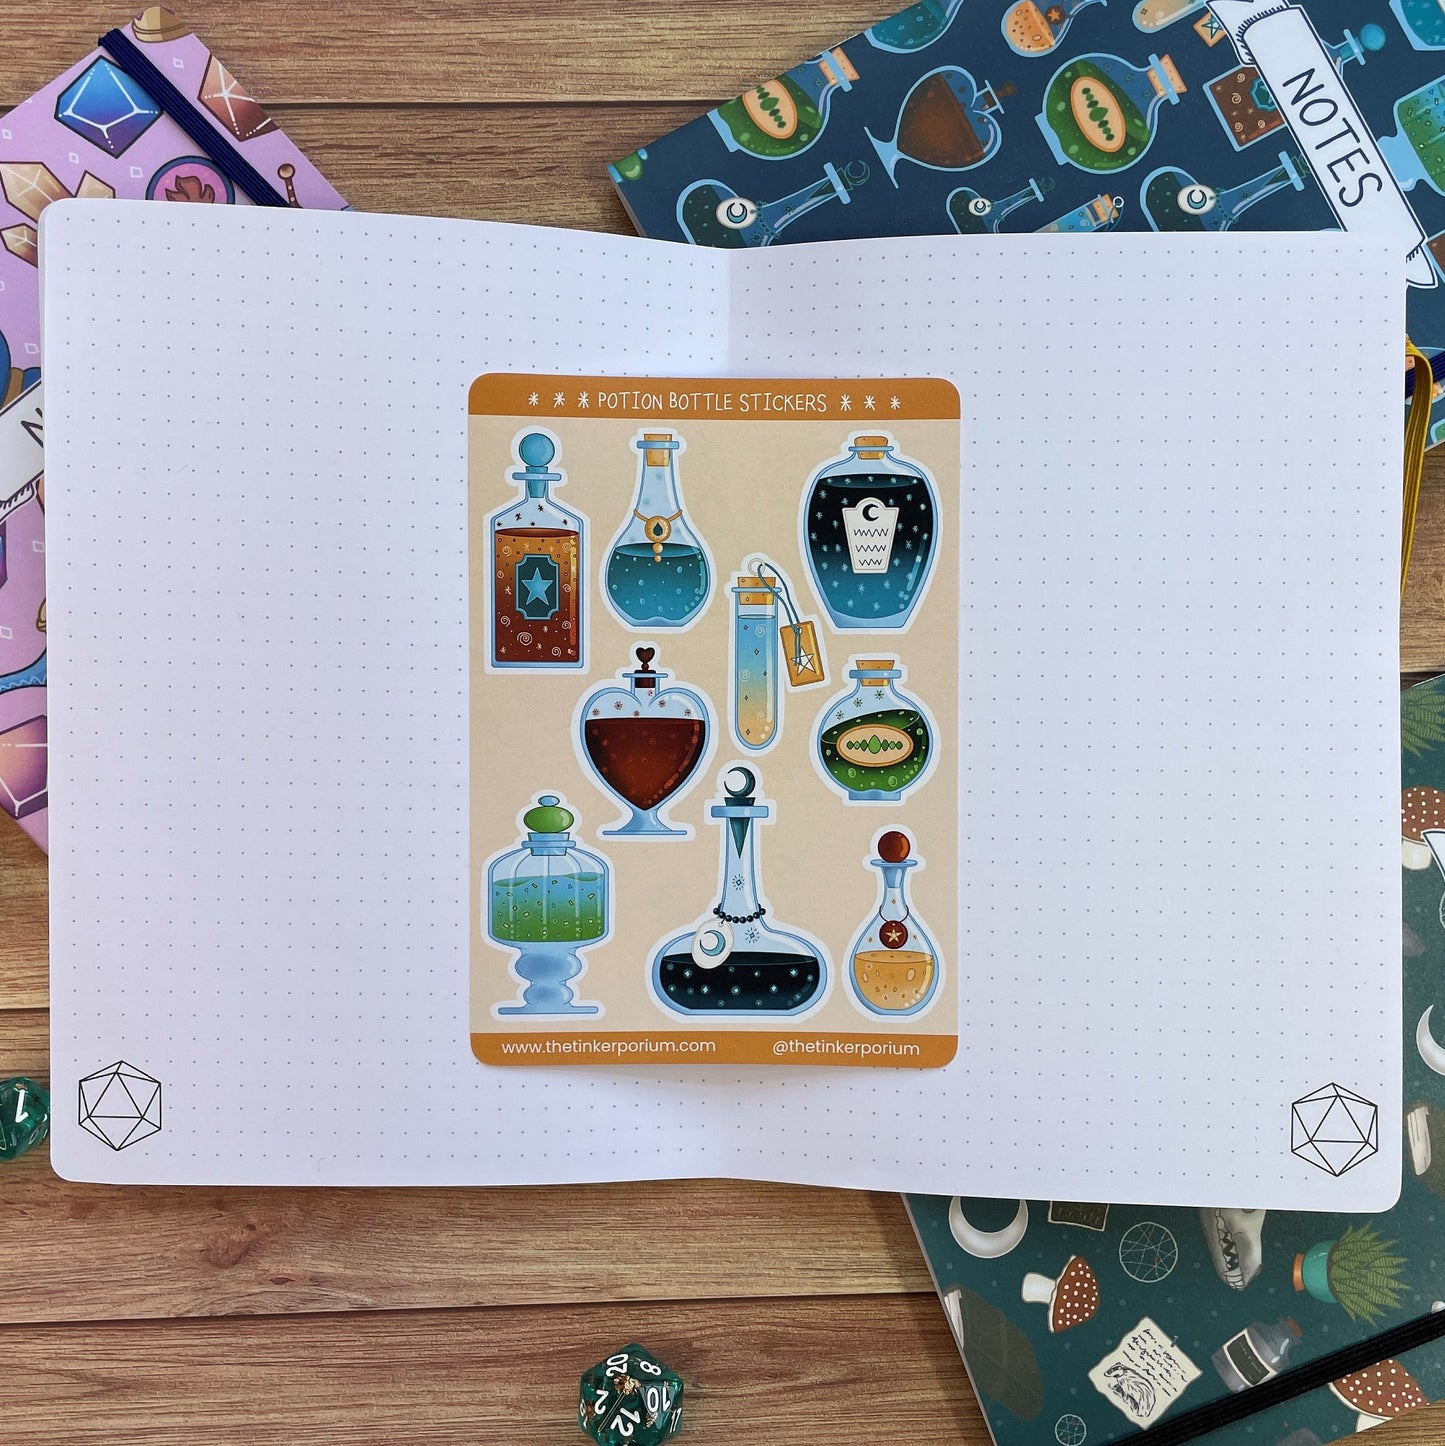 A6 Apothecary sticker set with 9 potion bottle paper stickers sat on an A5 notebook to show size